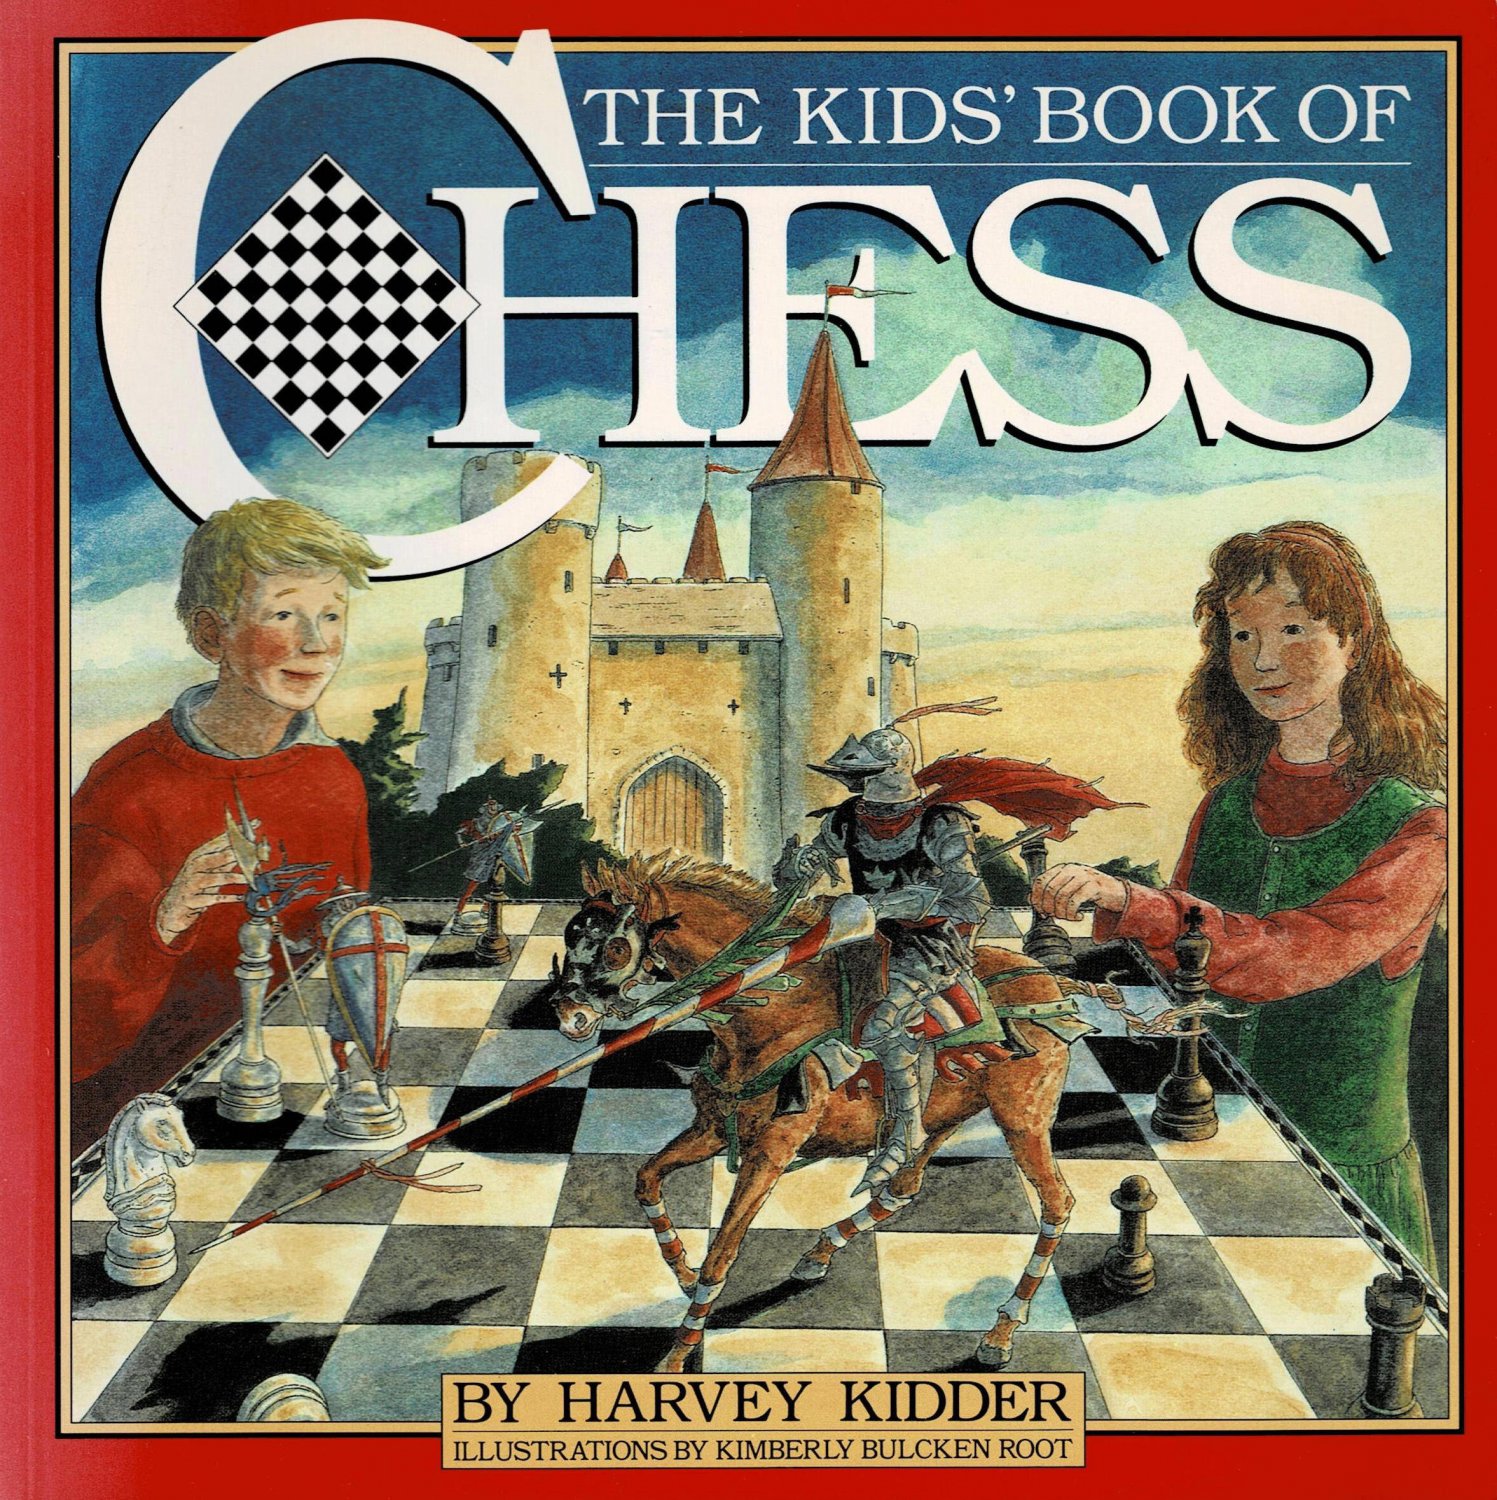 The Kids' Book of Chess By Harvey Kidder For Ages 7 & Up Paperback Book